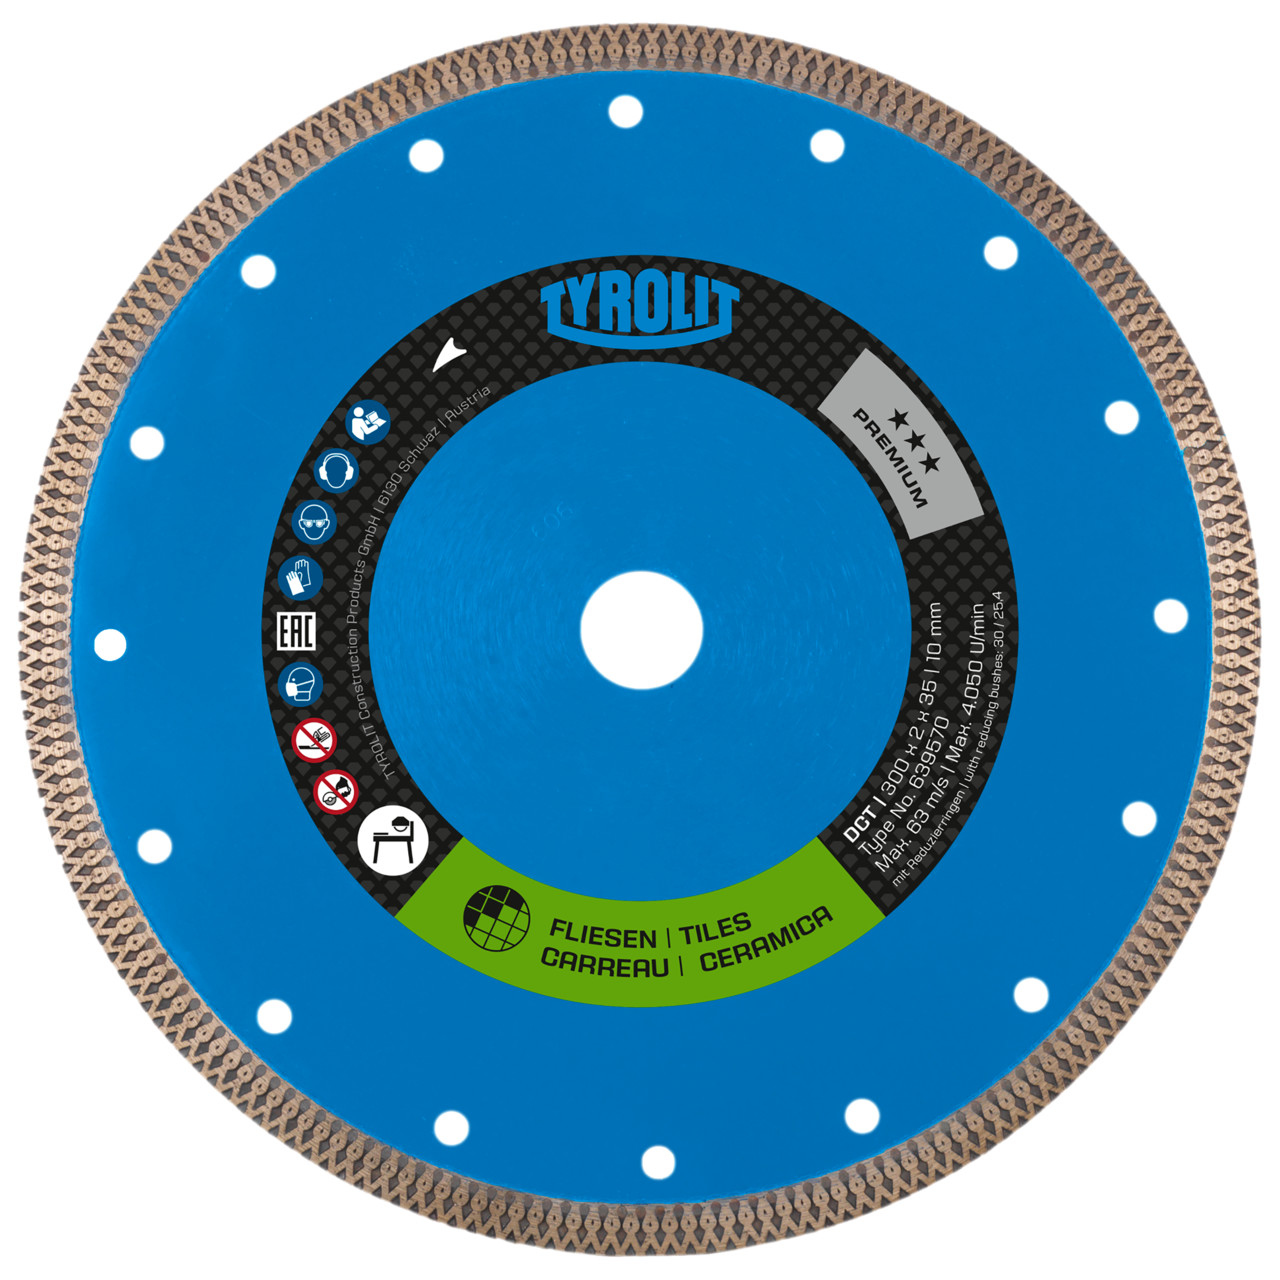 TYROLIT table saw blade DxTxH 200x1.6x35 DCT, shape: 1A1R (cut-off wheel with continuous cutting wheel), Art. 701934